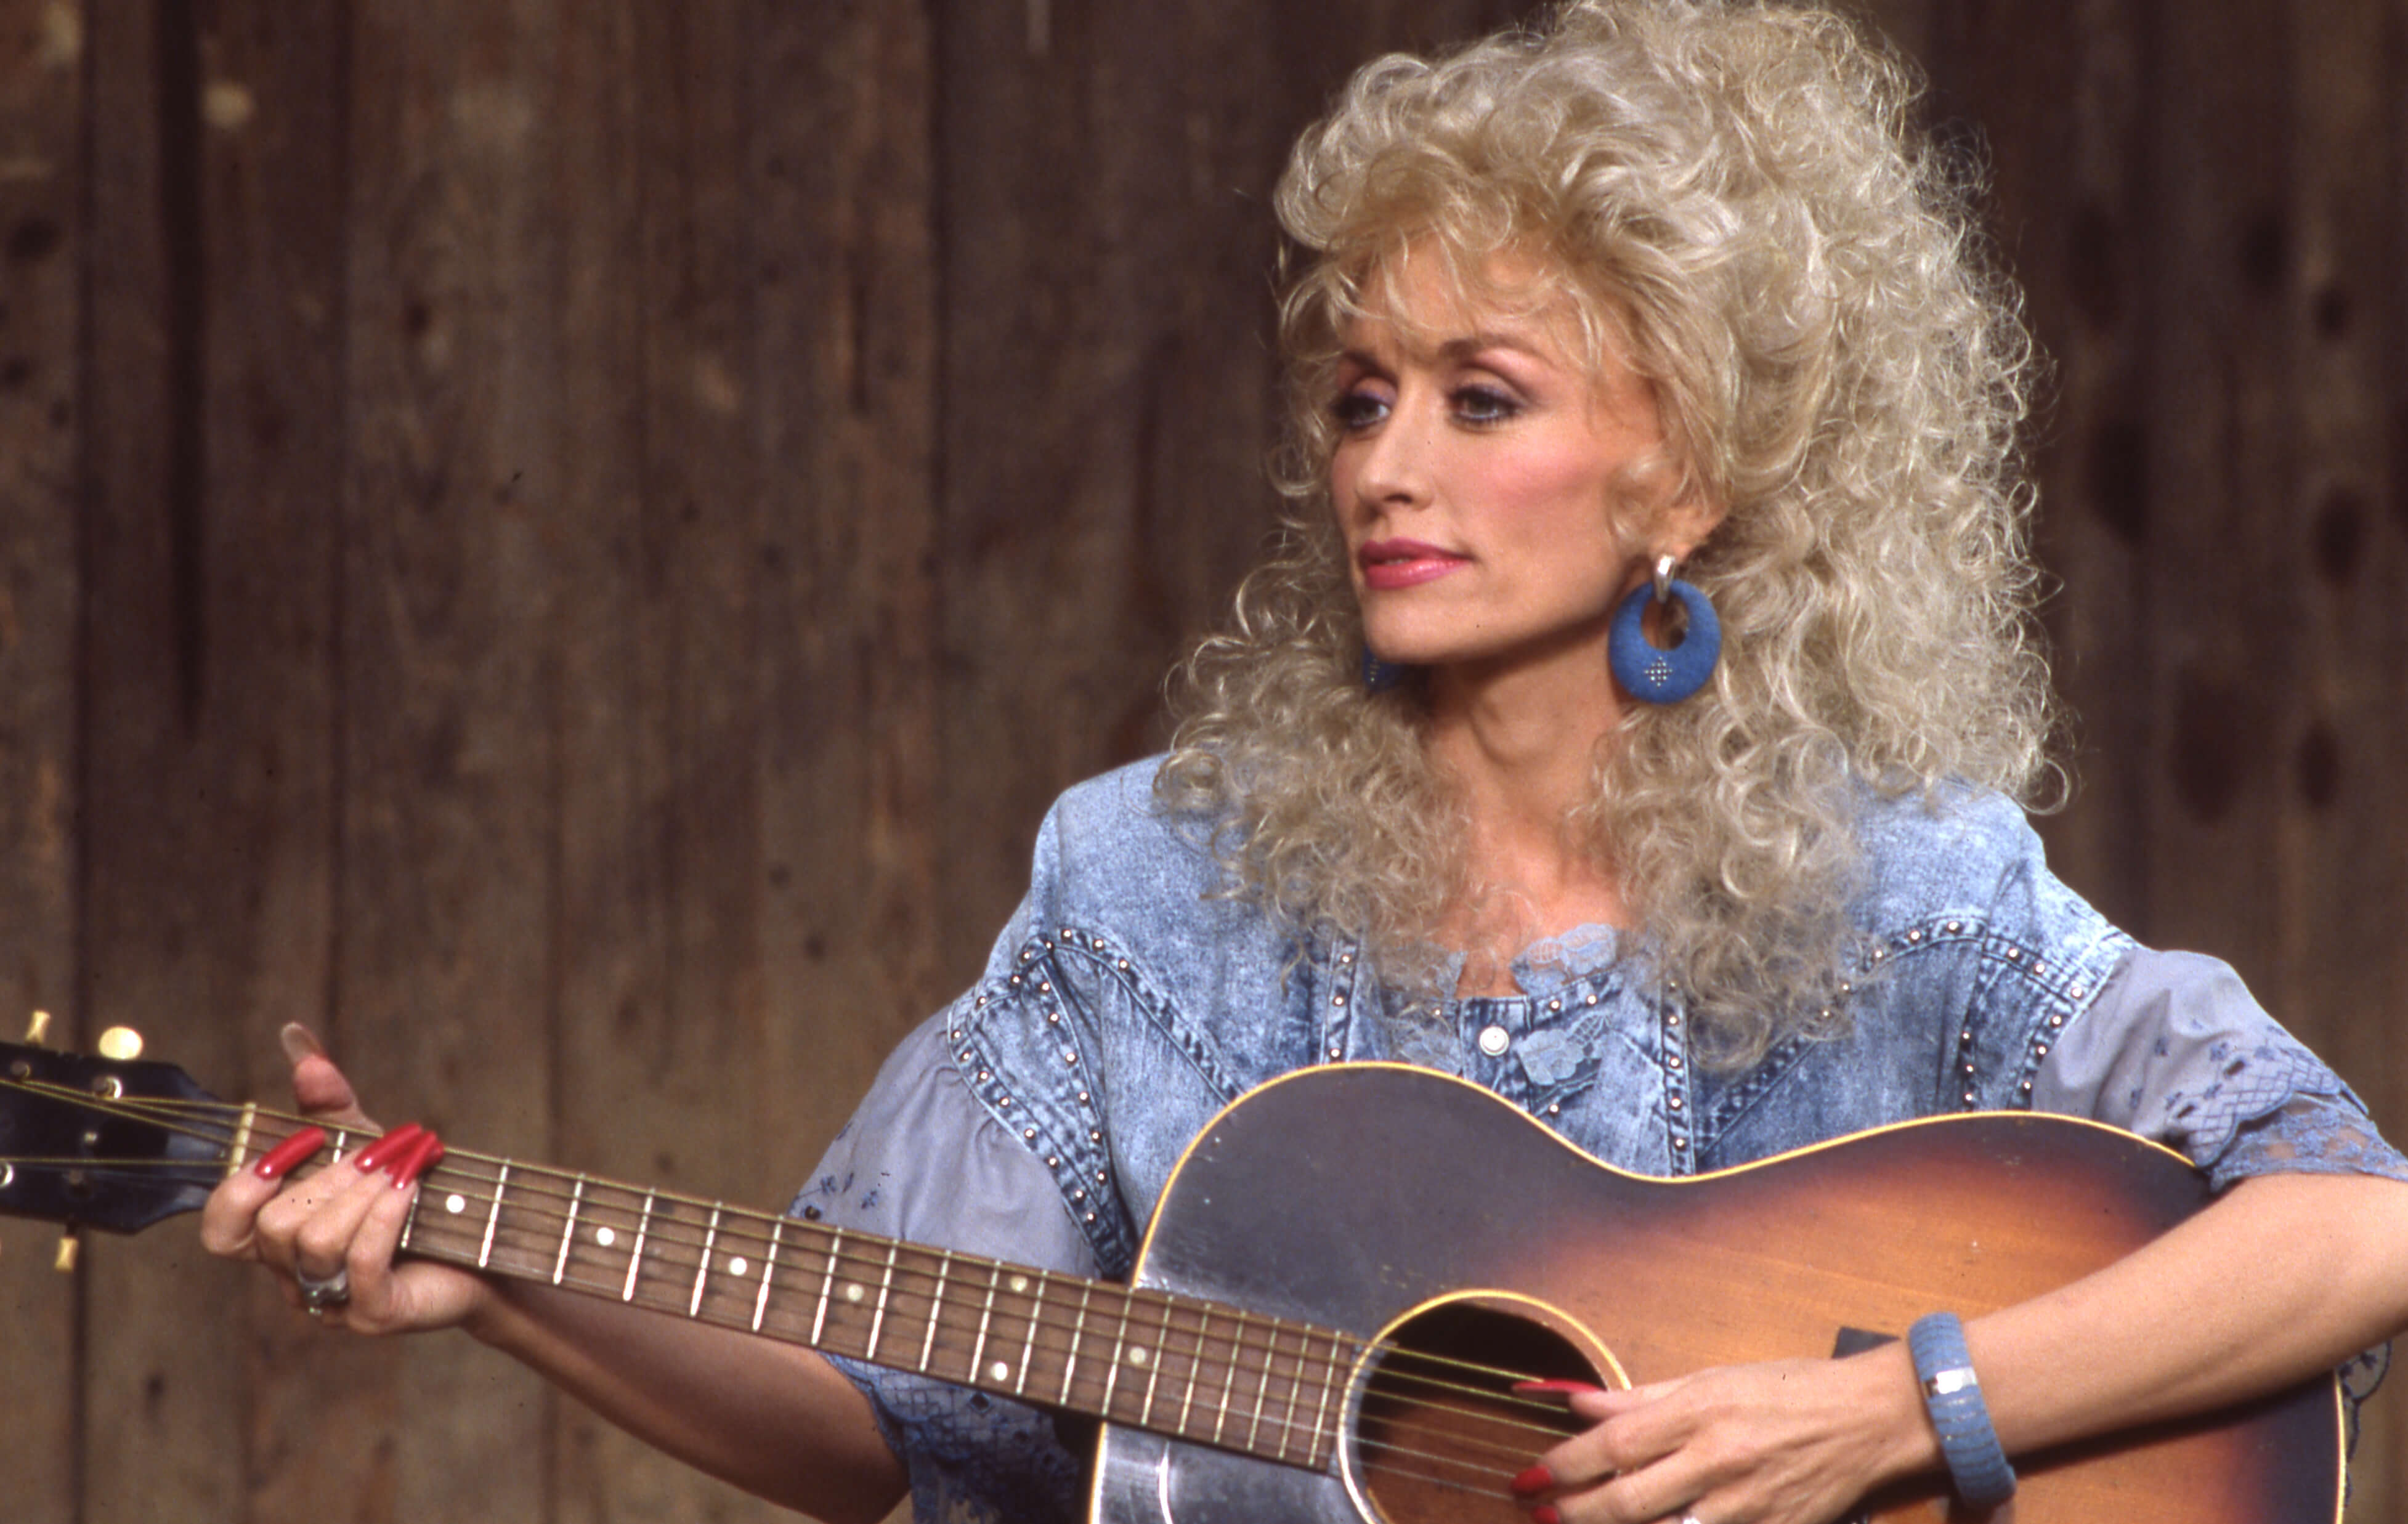 Dolly Parton playing guitar in a jean shirt.